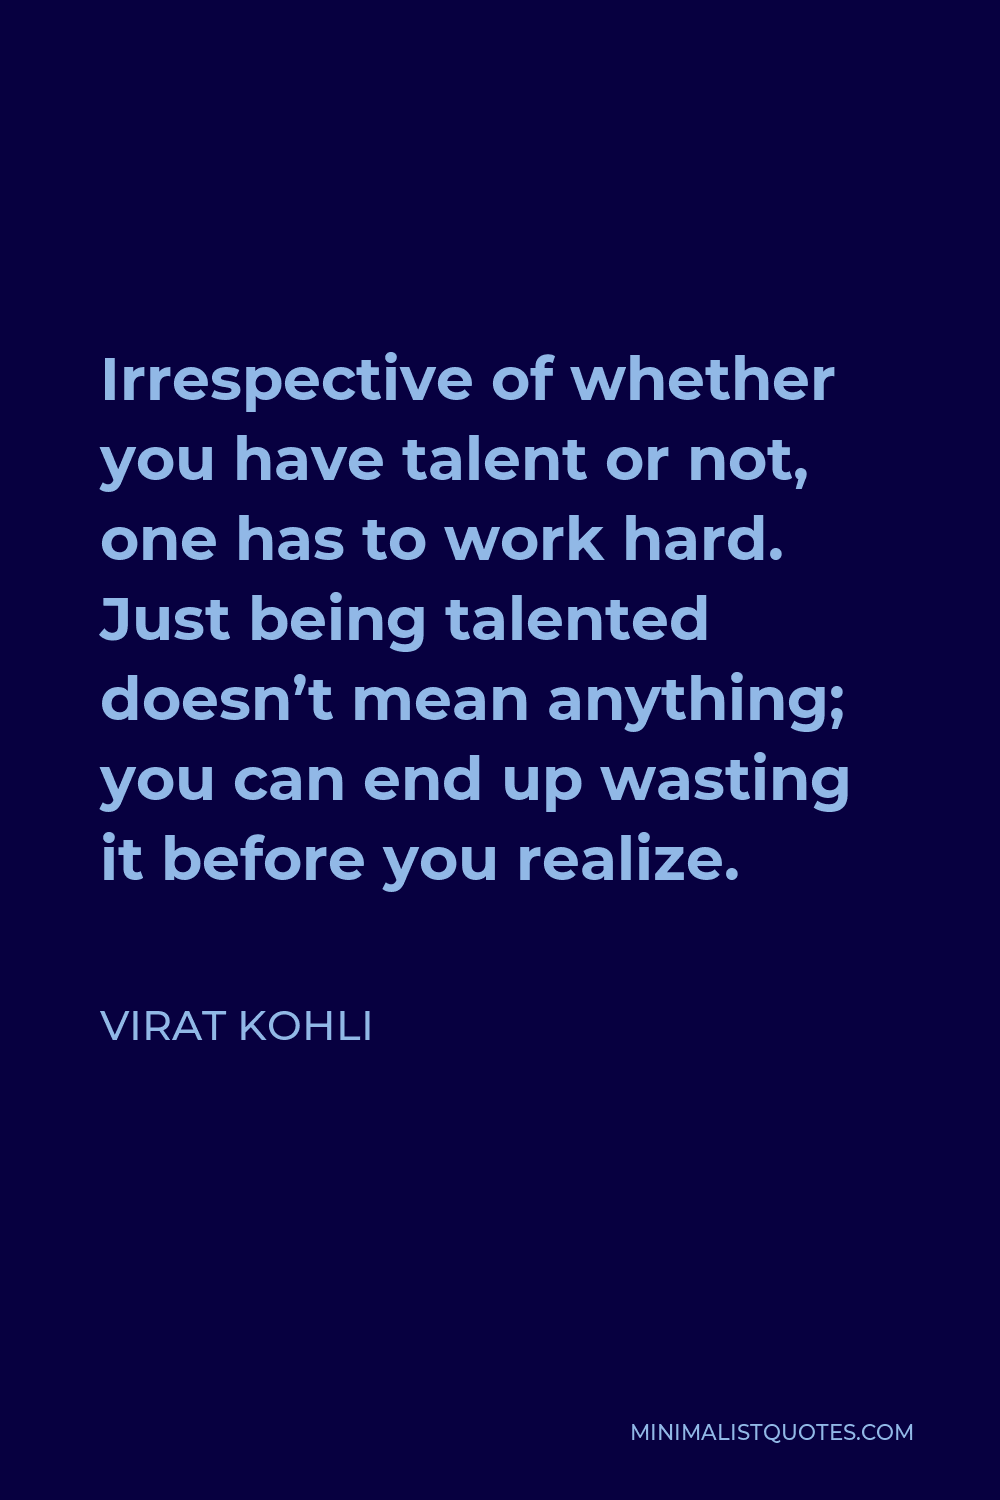 Virat Kohli Quote - Irrespective of whether you have talent or not, one has to work hard. Just being talented doesn’t mean anything; you can end up wasting it before you realize.